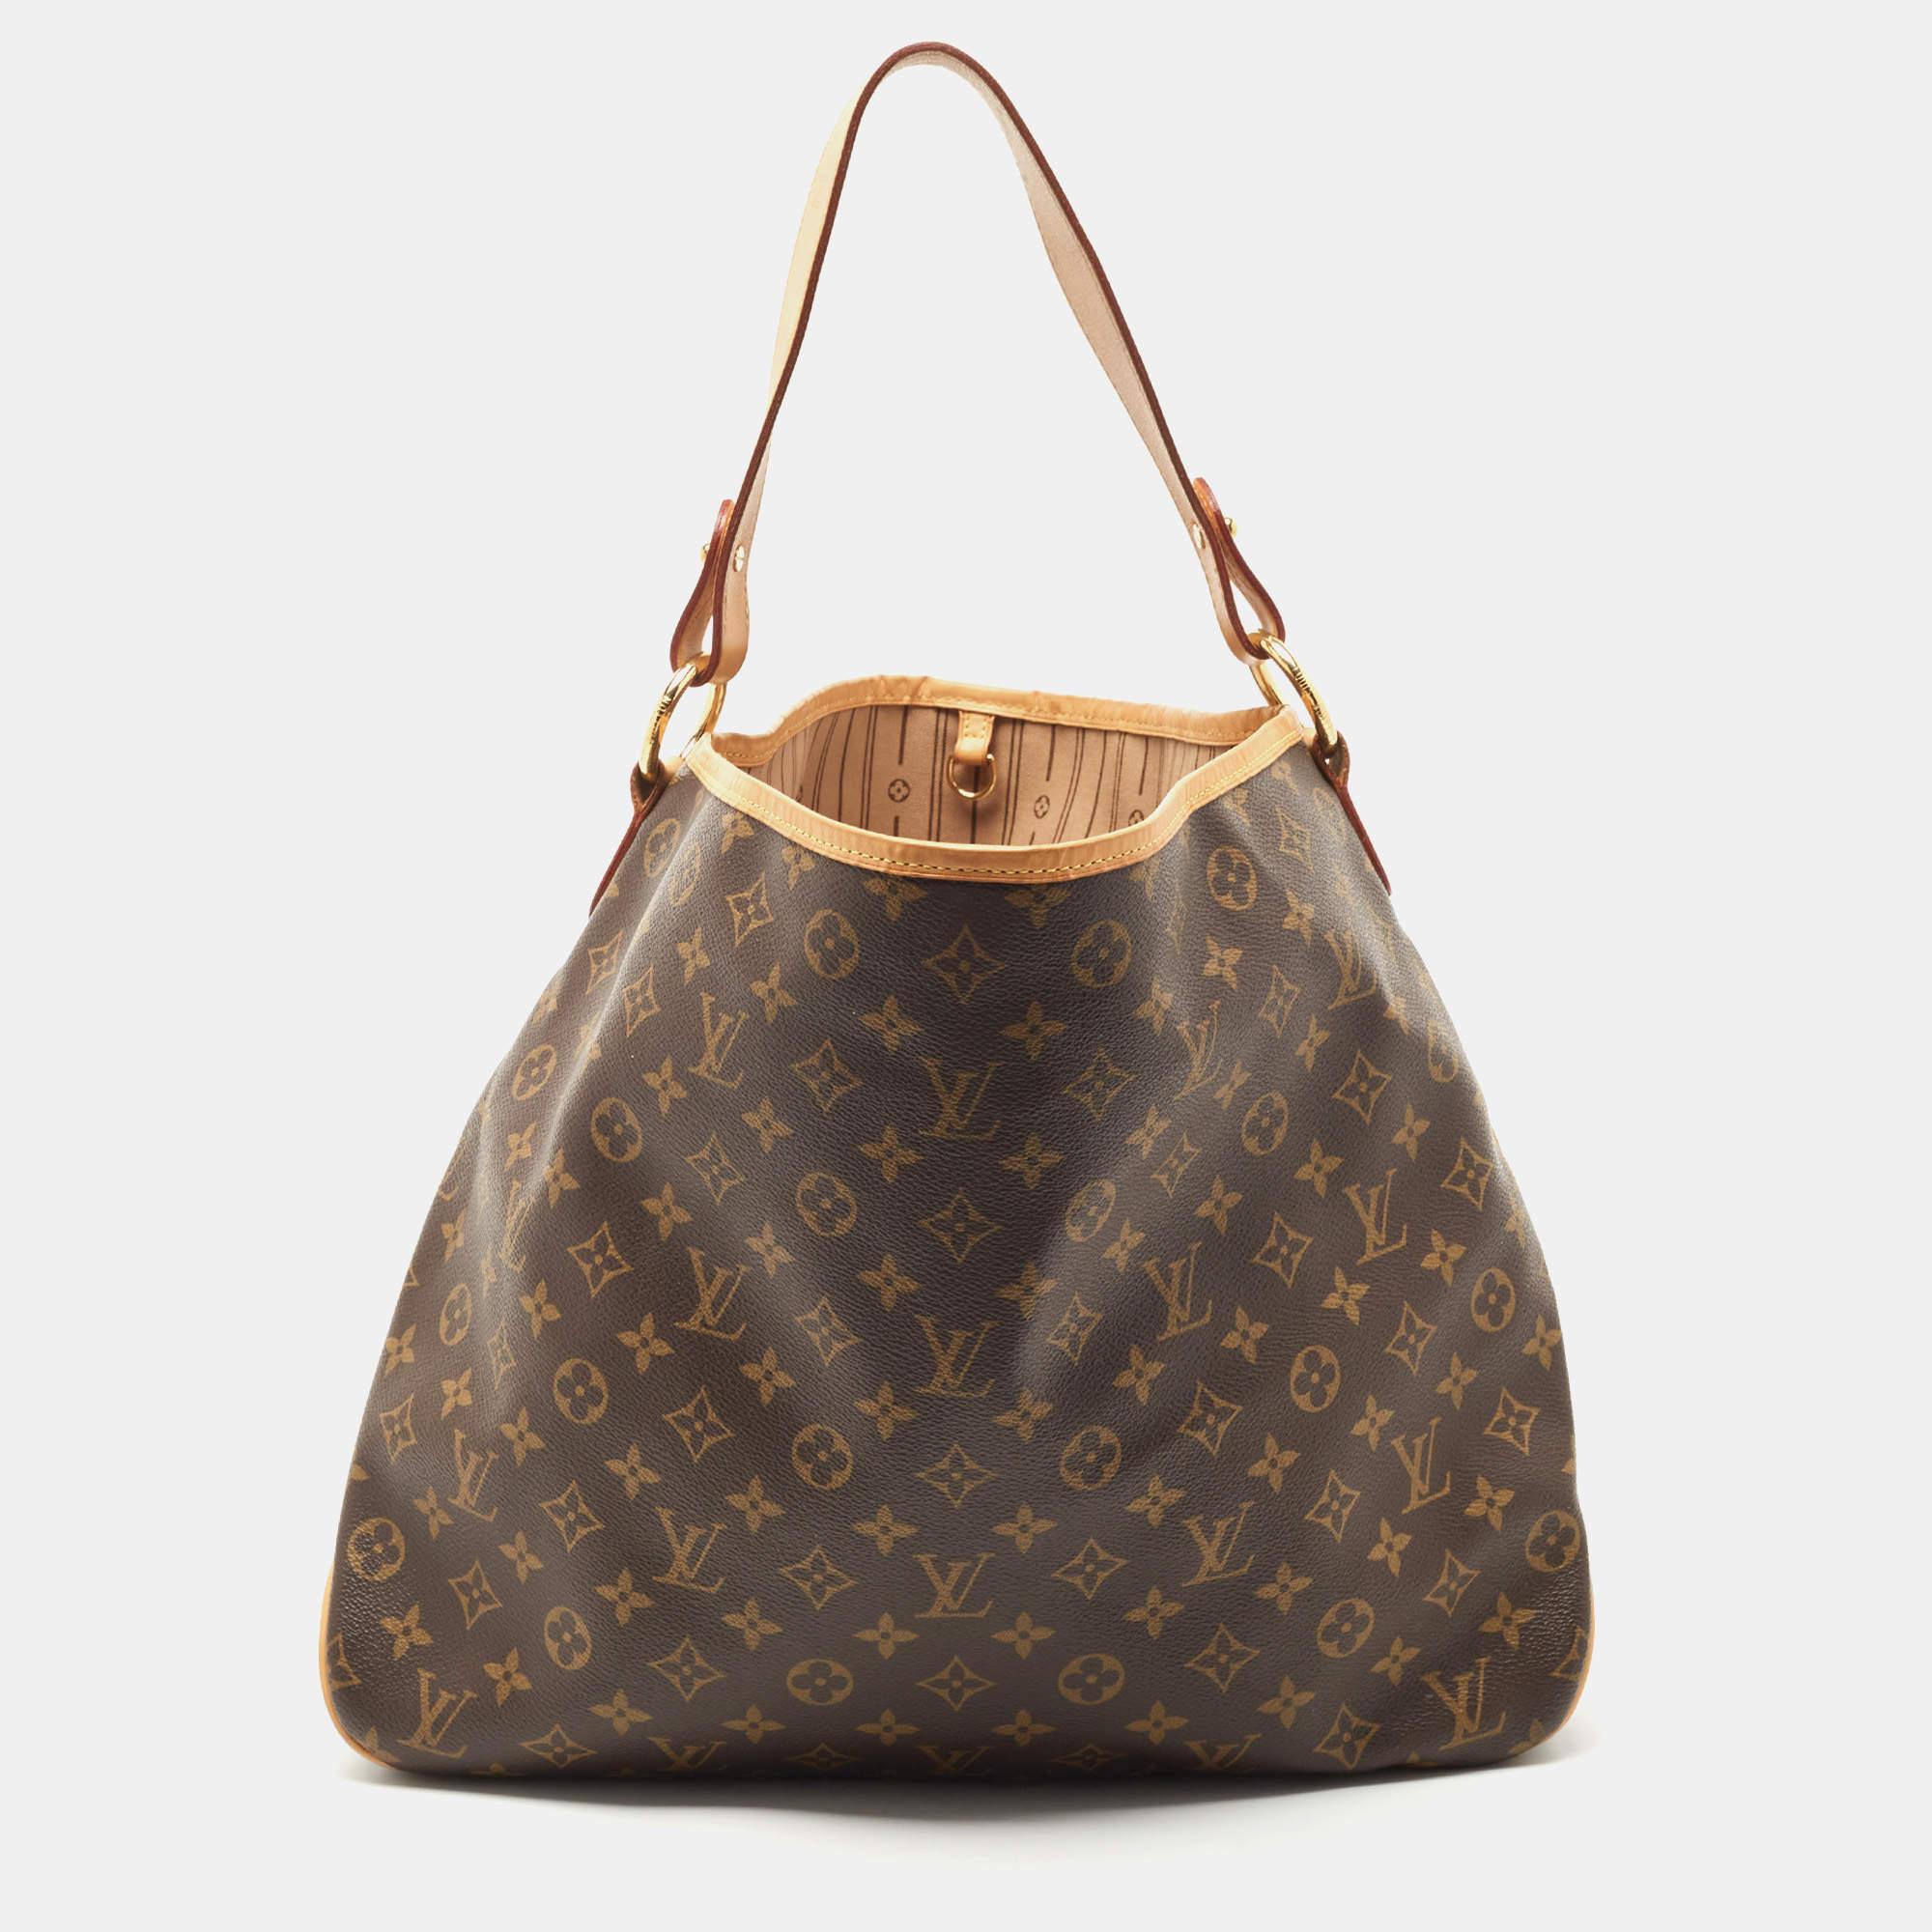 This Delightful MM bag from the House of Louis Vuitton brings you endless style, comfort, and luxury. It is crafted using Monogram canvas and displays gold-tone hardware, a canvas-lined interior, and leather trims.

Includes: Original Dustbag